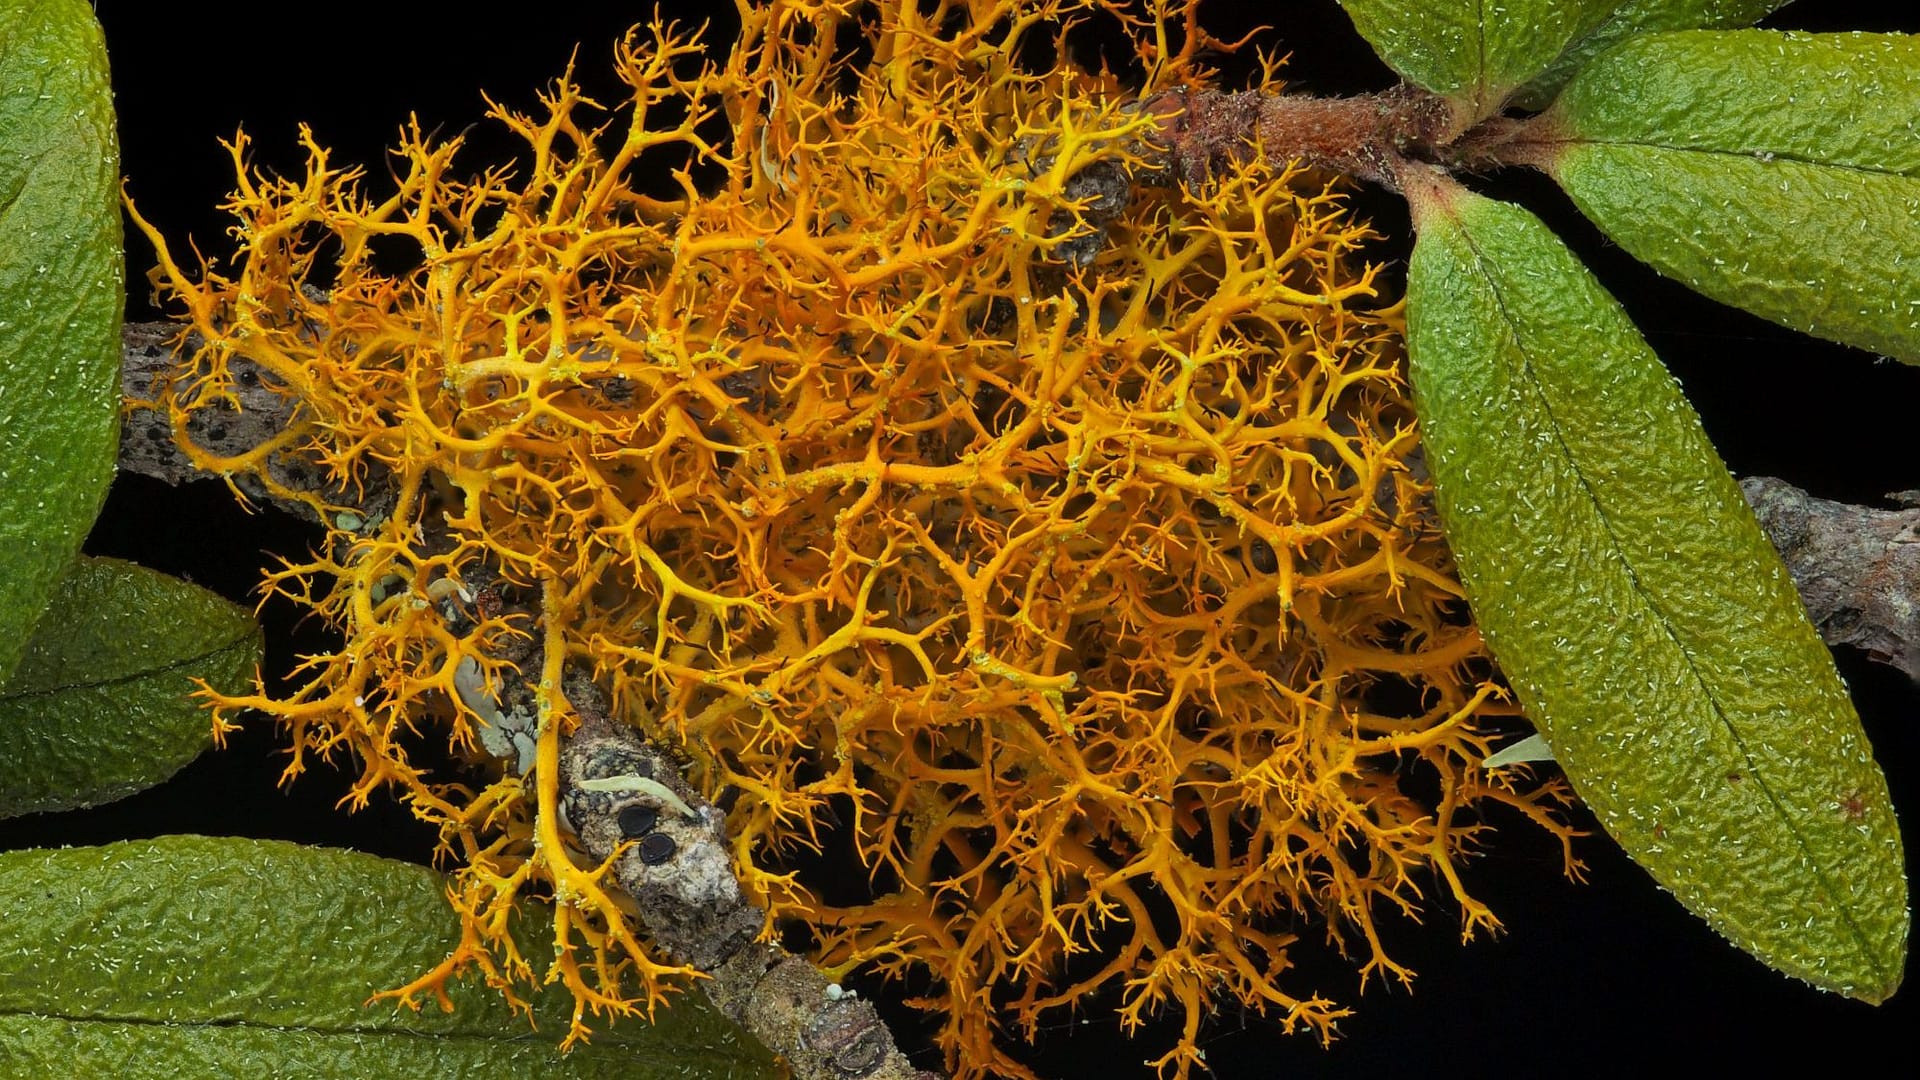 Image: orange spindly lichen growing on a branch with leaves